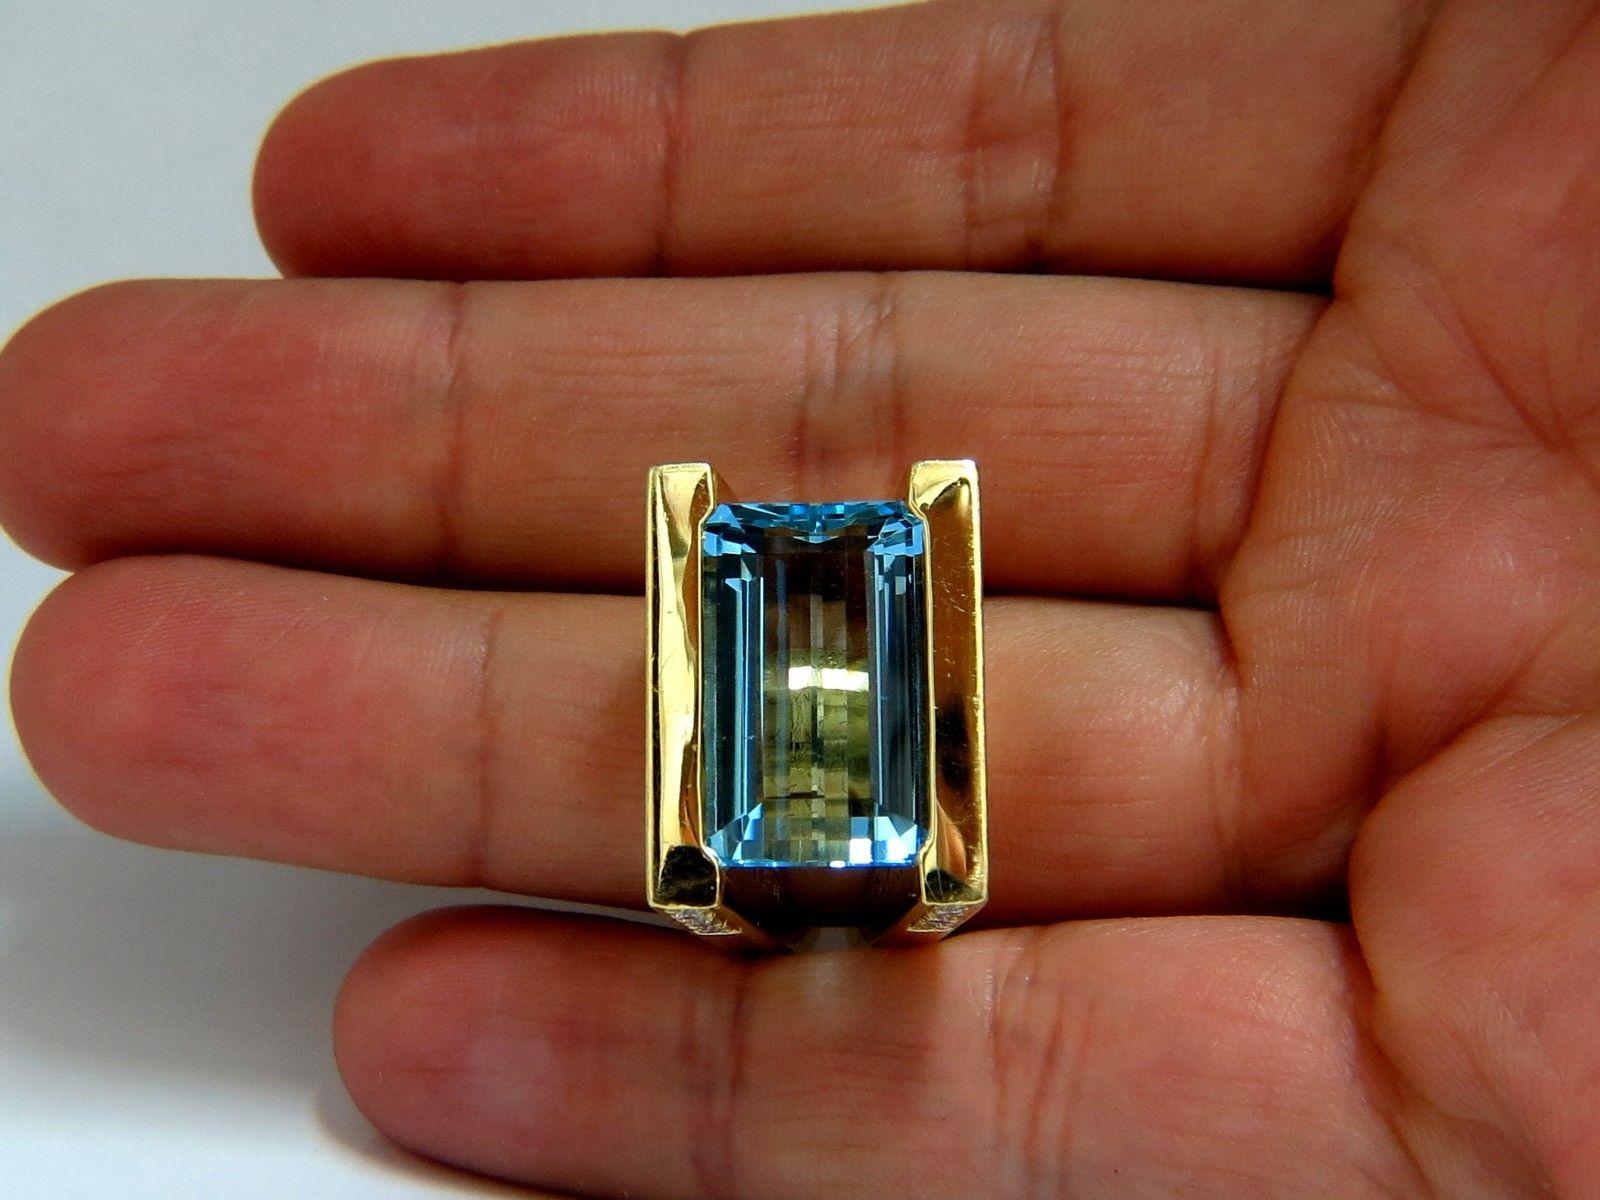 Designer AntonGianni 

Aquamarine Collections

15ct. Natural Aquamarine Ring

 Excellent clean clarity

 Octagonal Step cut (emerald cut).

Blue Aqua color.

Brilliant sparkles from all angles

Pristine Transparency

24x16mm

.20ct natural side